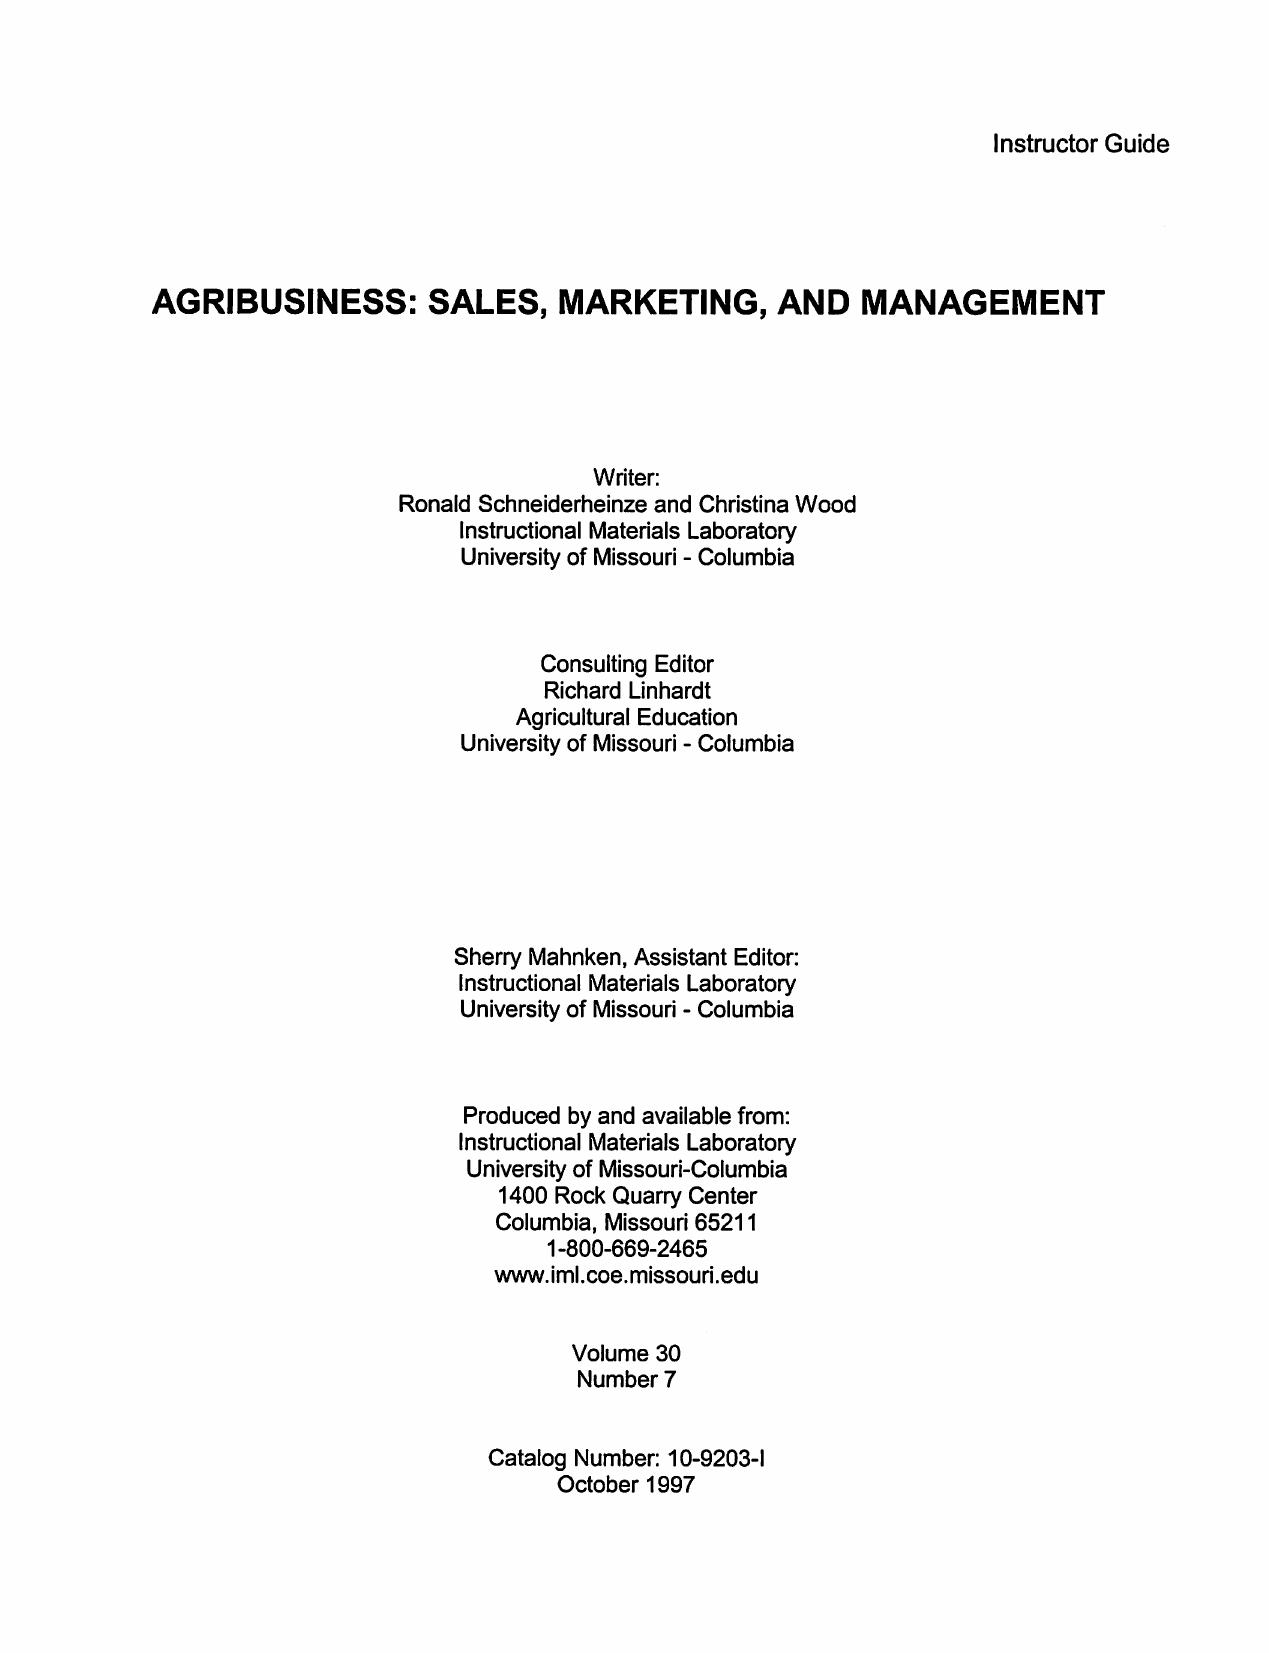 agribusiness  sales, marketing, and management 1997